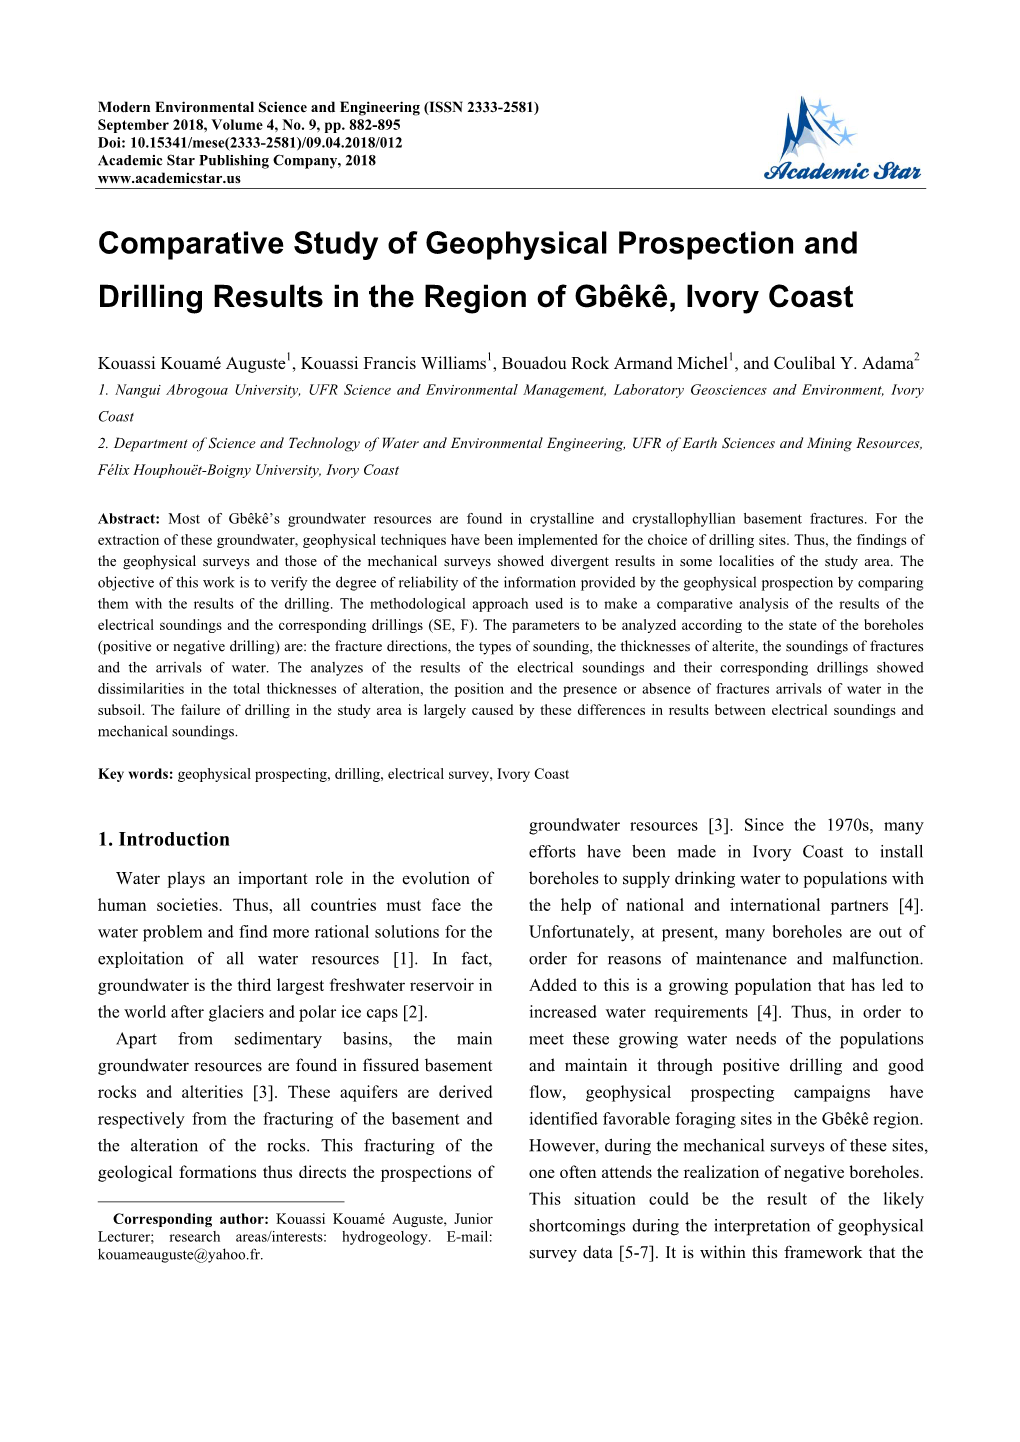 Comparative Study of Geophysical Prospection and Drilling Results in the Region of Gbêkê, Ivory Coast